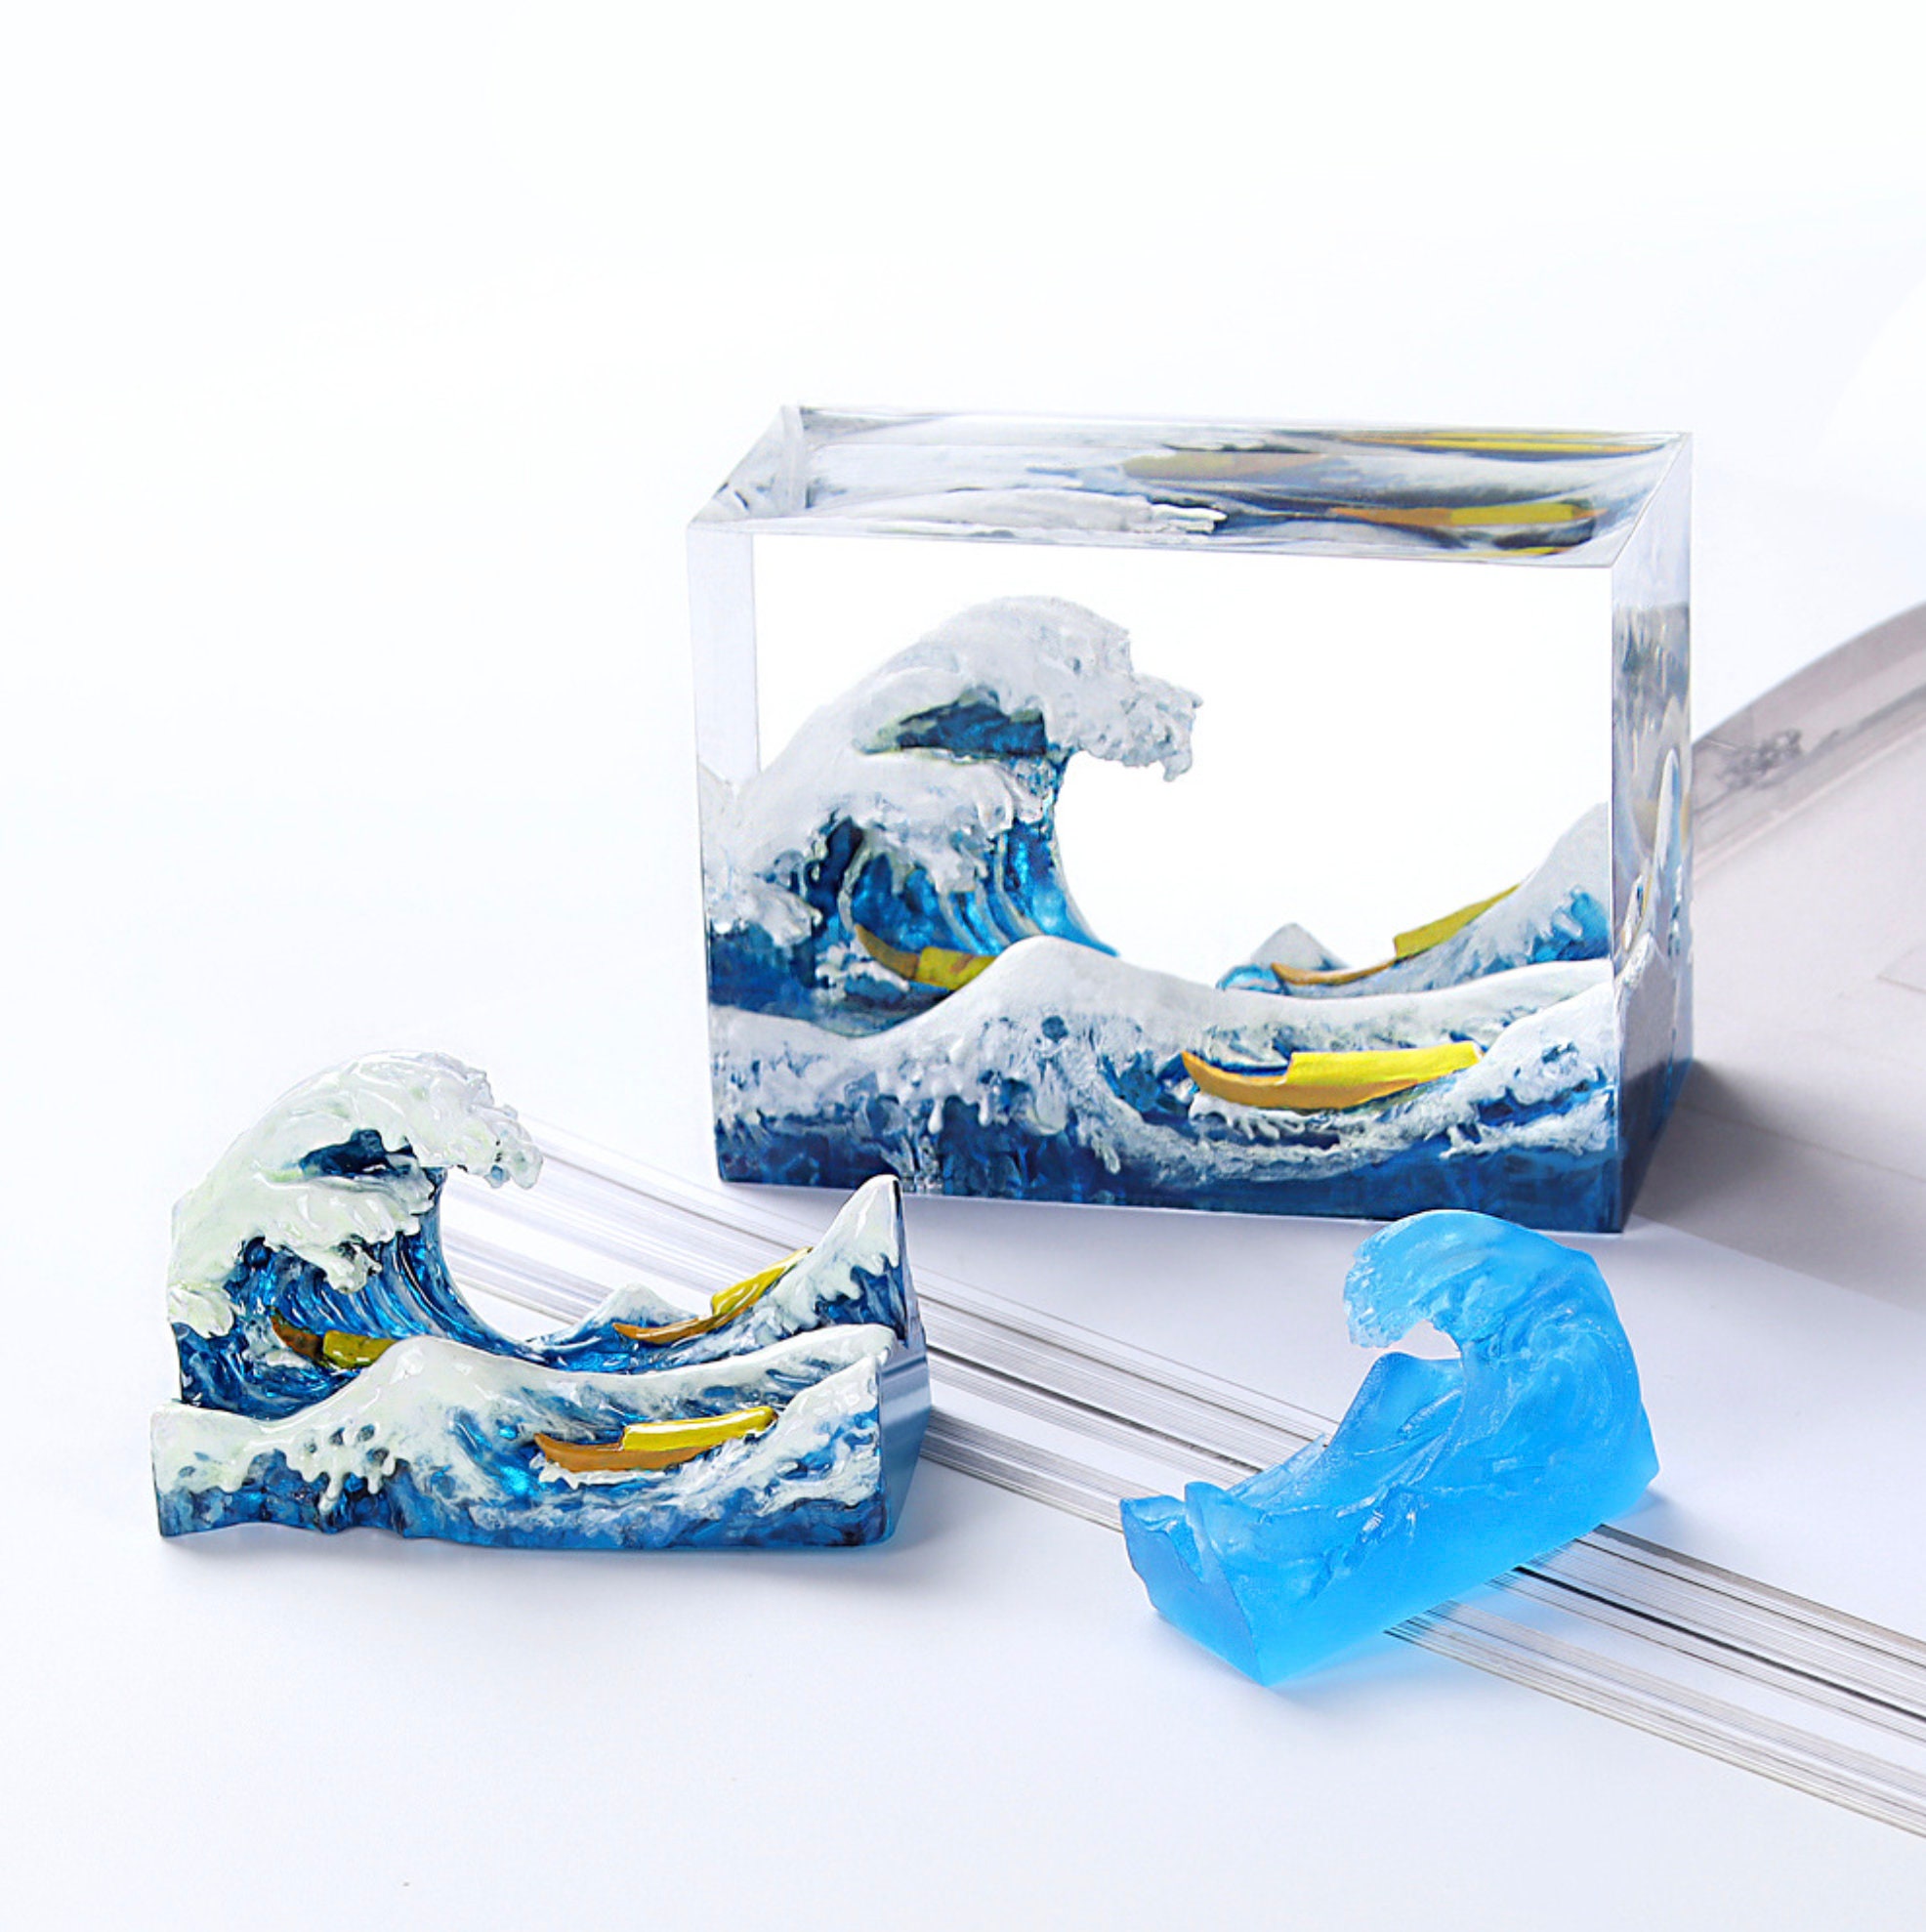 Blue Ocean Resin Mold For Handmade Crafts And Home Decor Agate, Sea Wave,  Silicone, Epoxy Glass Cast Resin Mold From Giftvinco13, $3.81